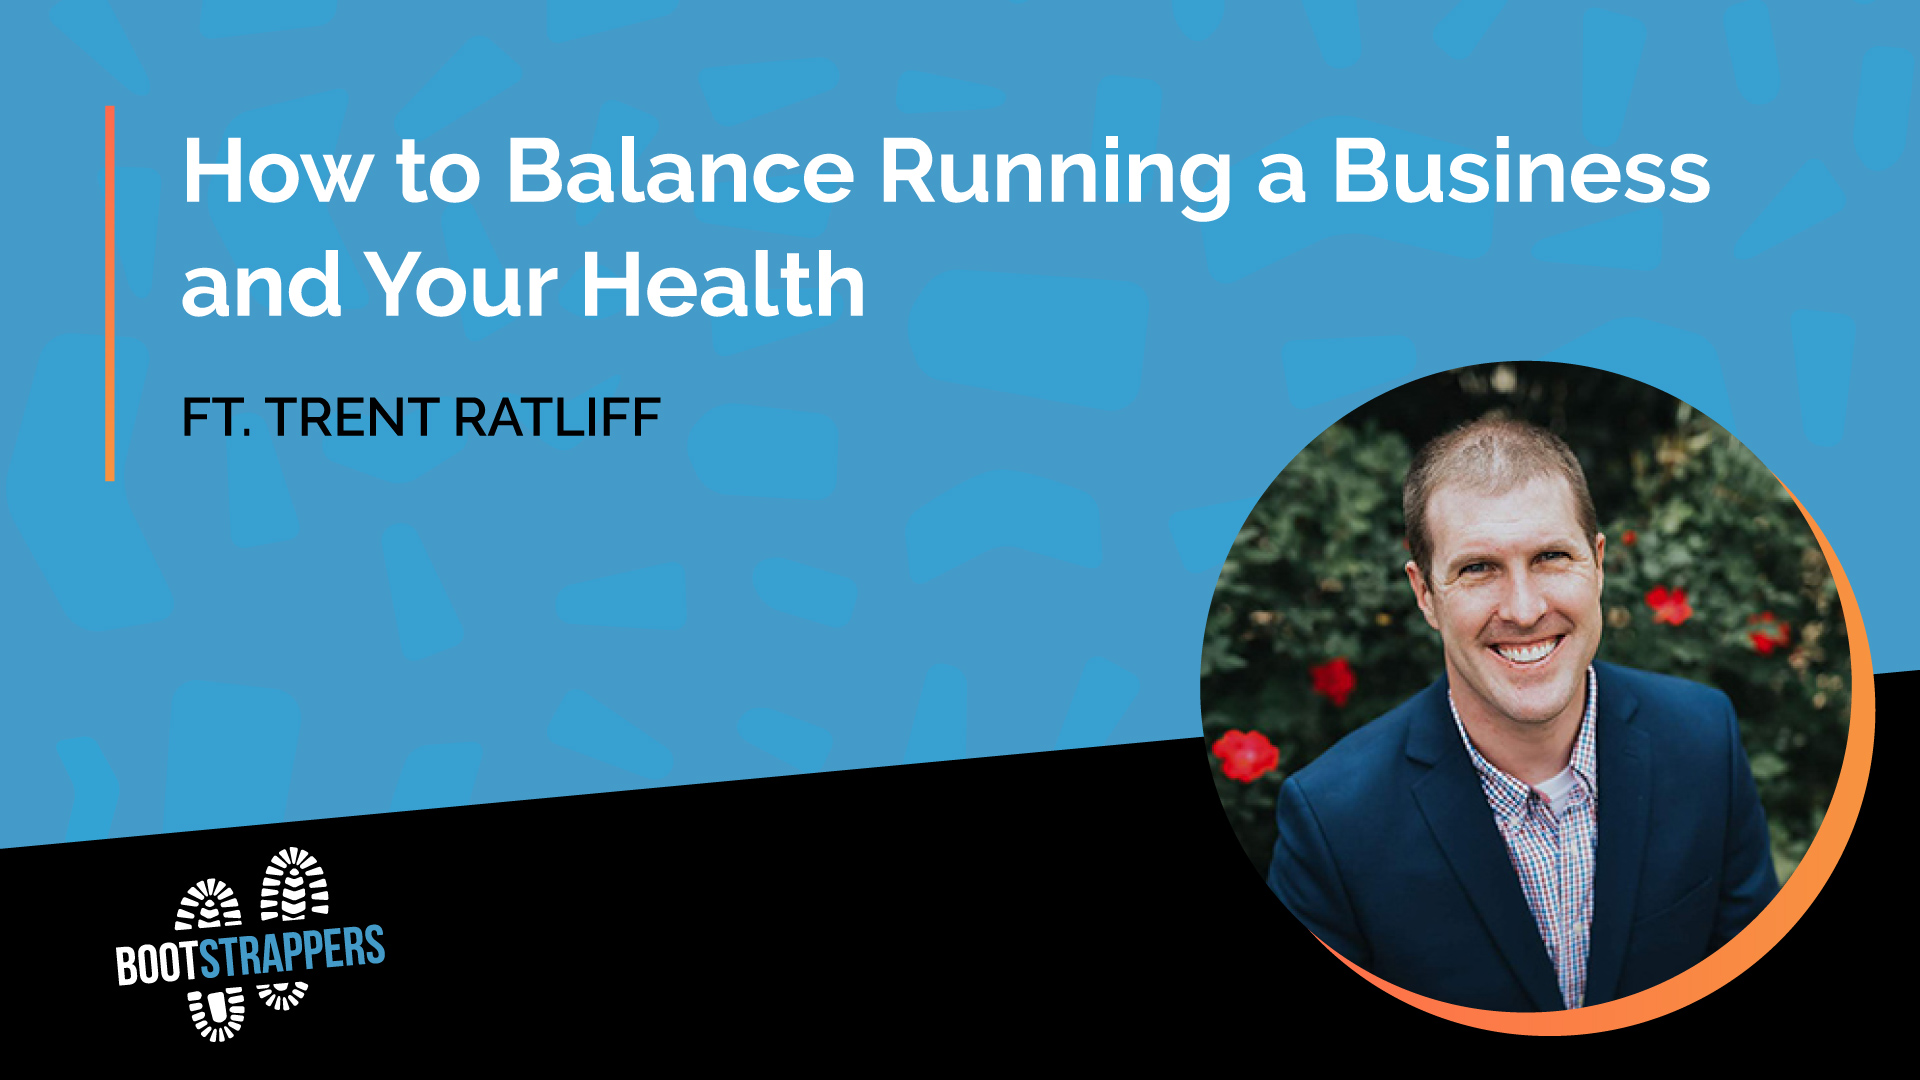 anequim-bootstrappers-how-to-balance-running-business-and-health